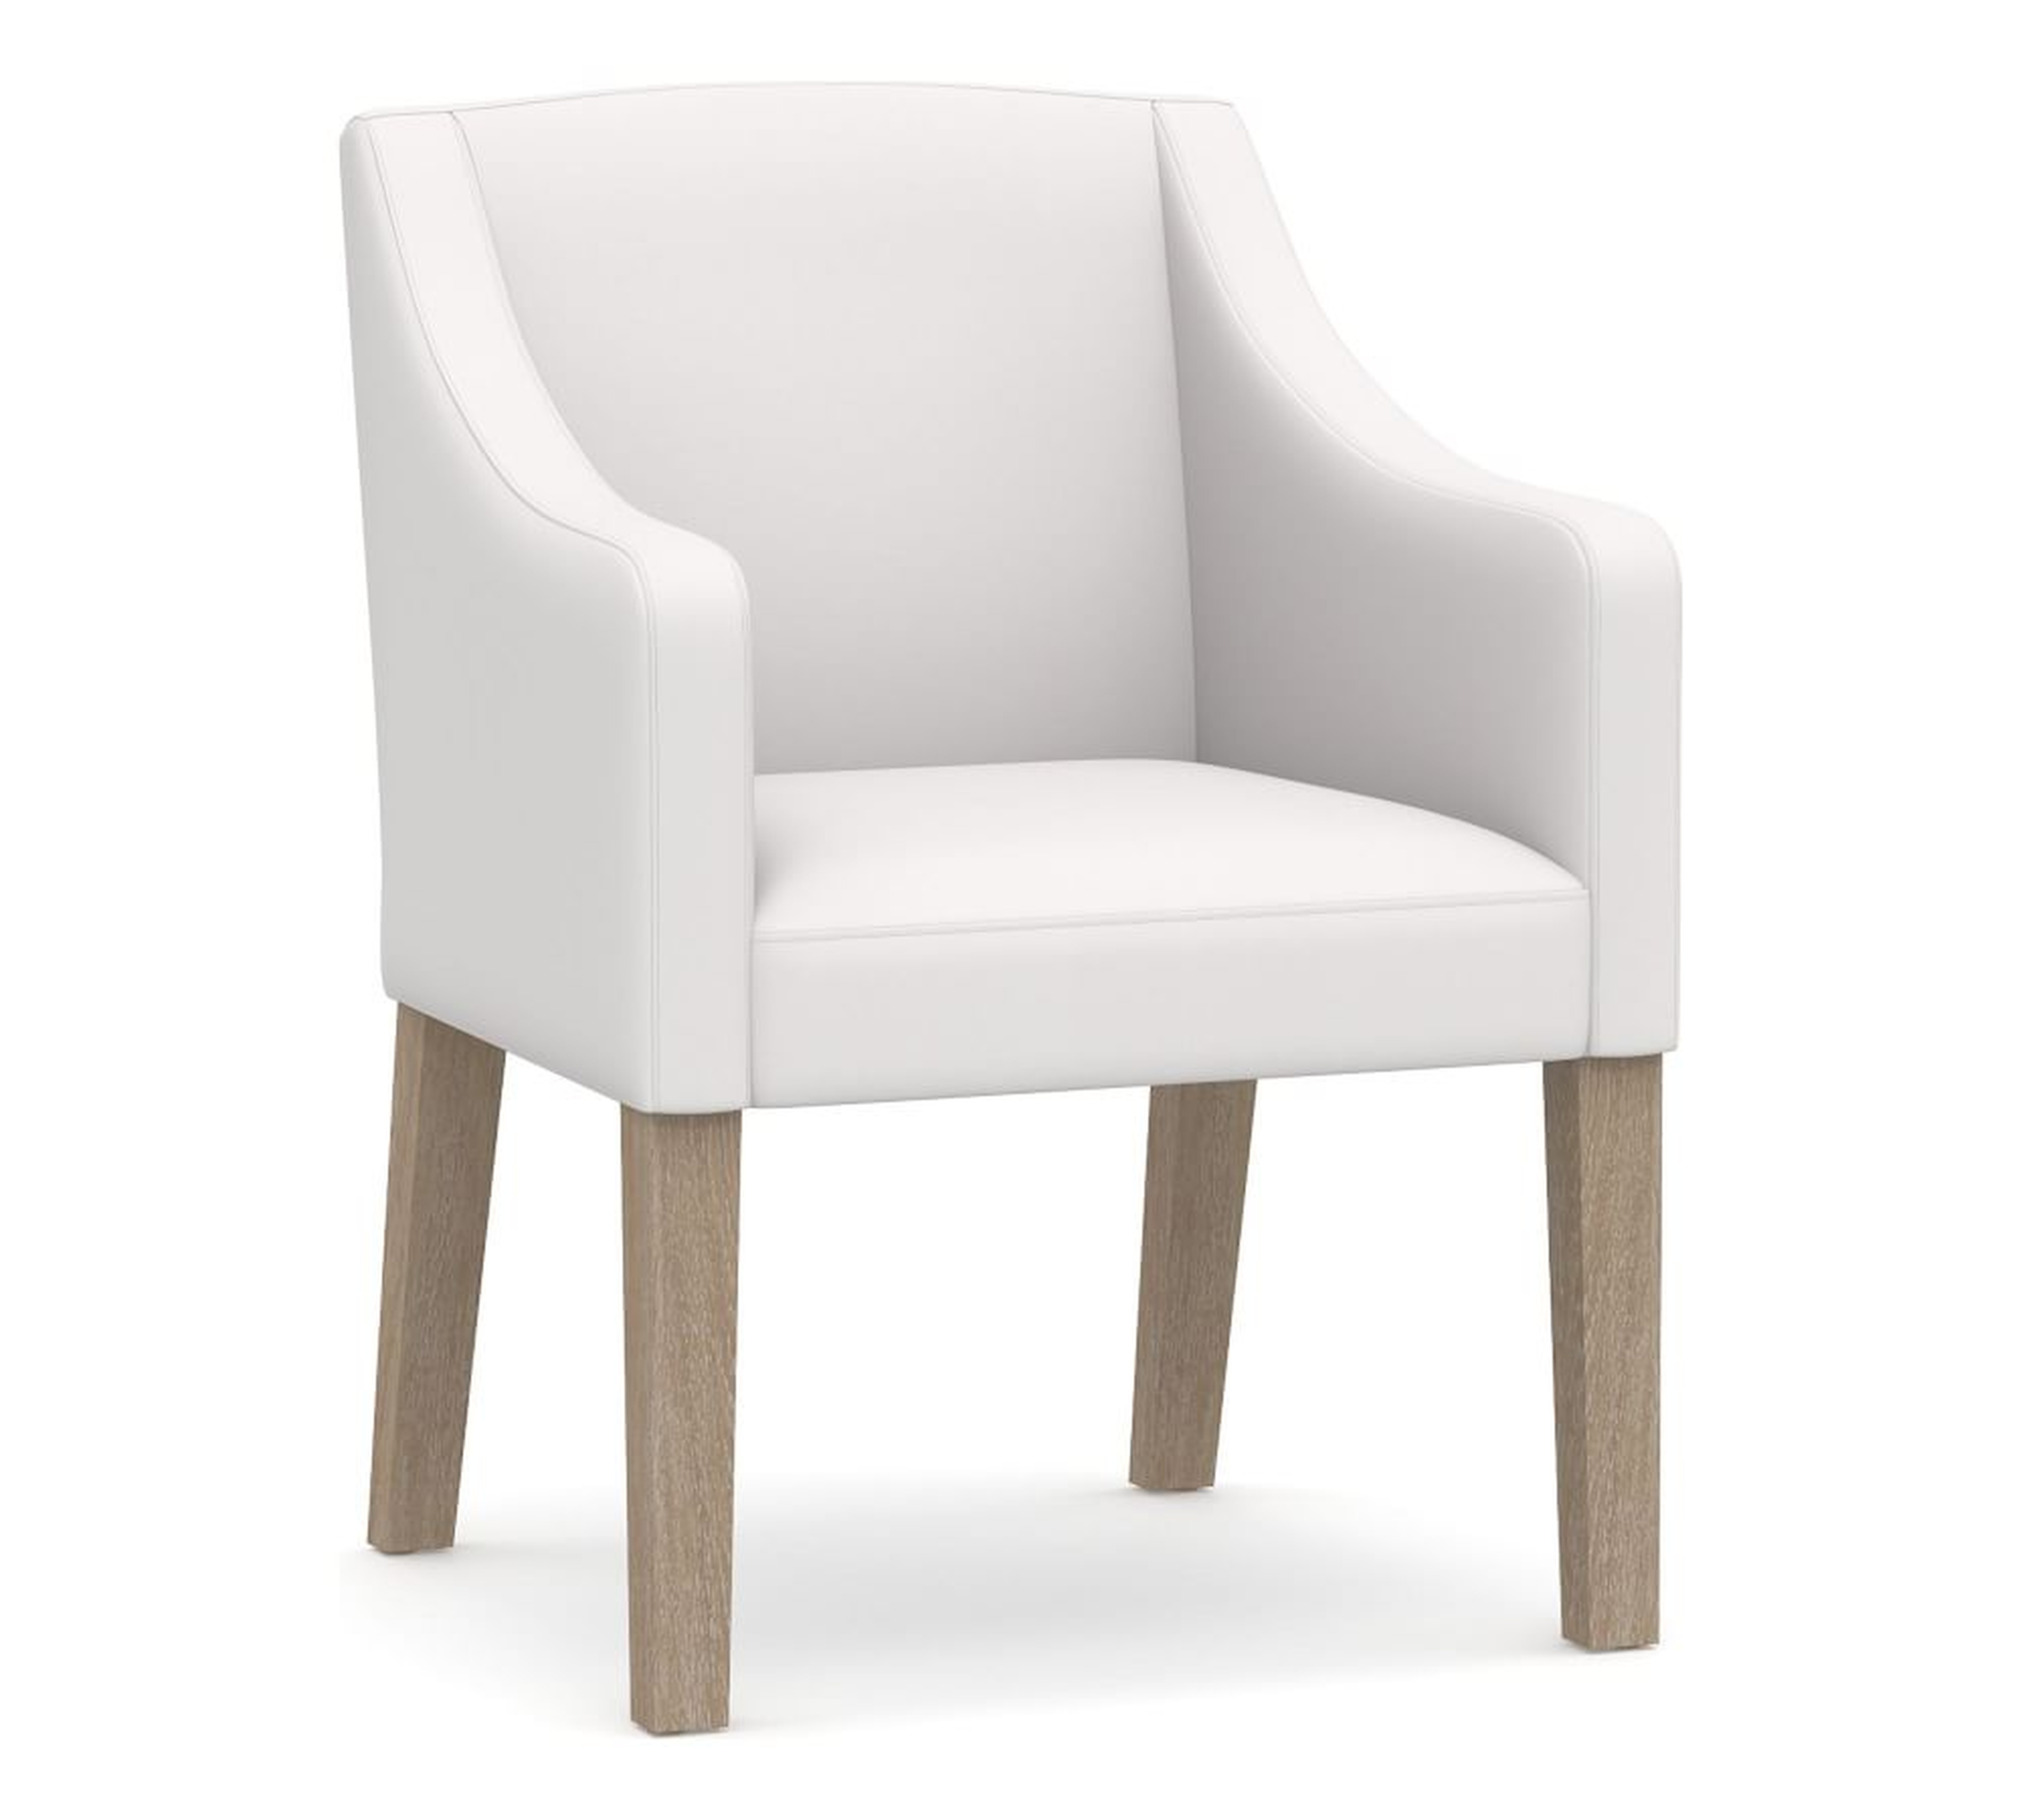 Classic Upholstered Slope Armchair with Seadrift Legs, Twill White - Pottery Barn